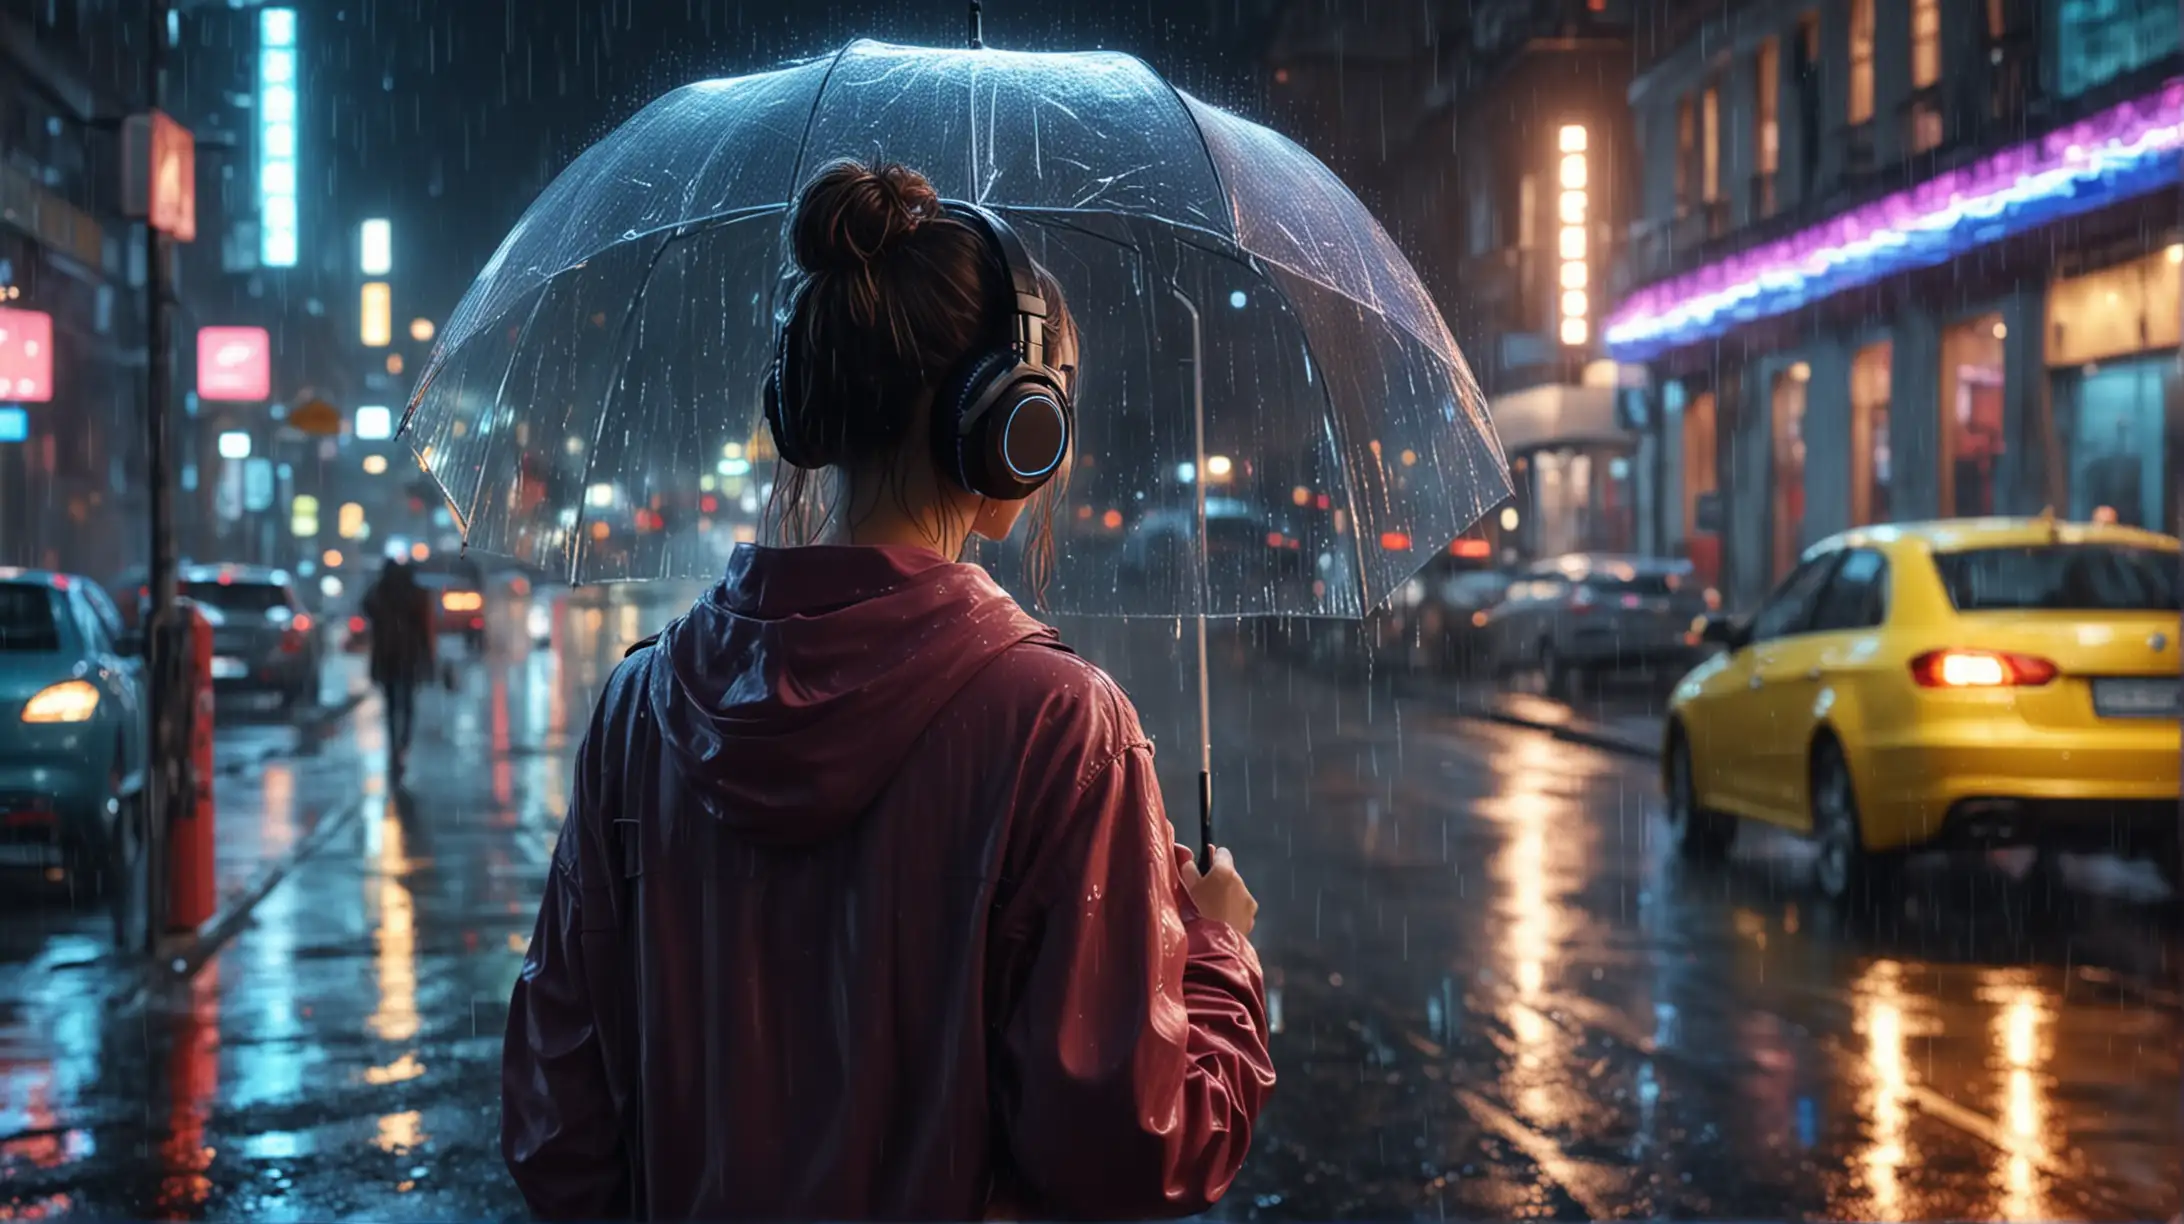 look from behind, girl staying in rain, with headphones and transparent umbrella, cars passing by, night city with neon lights, very realistic, 8K